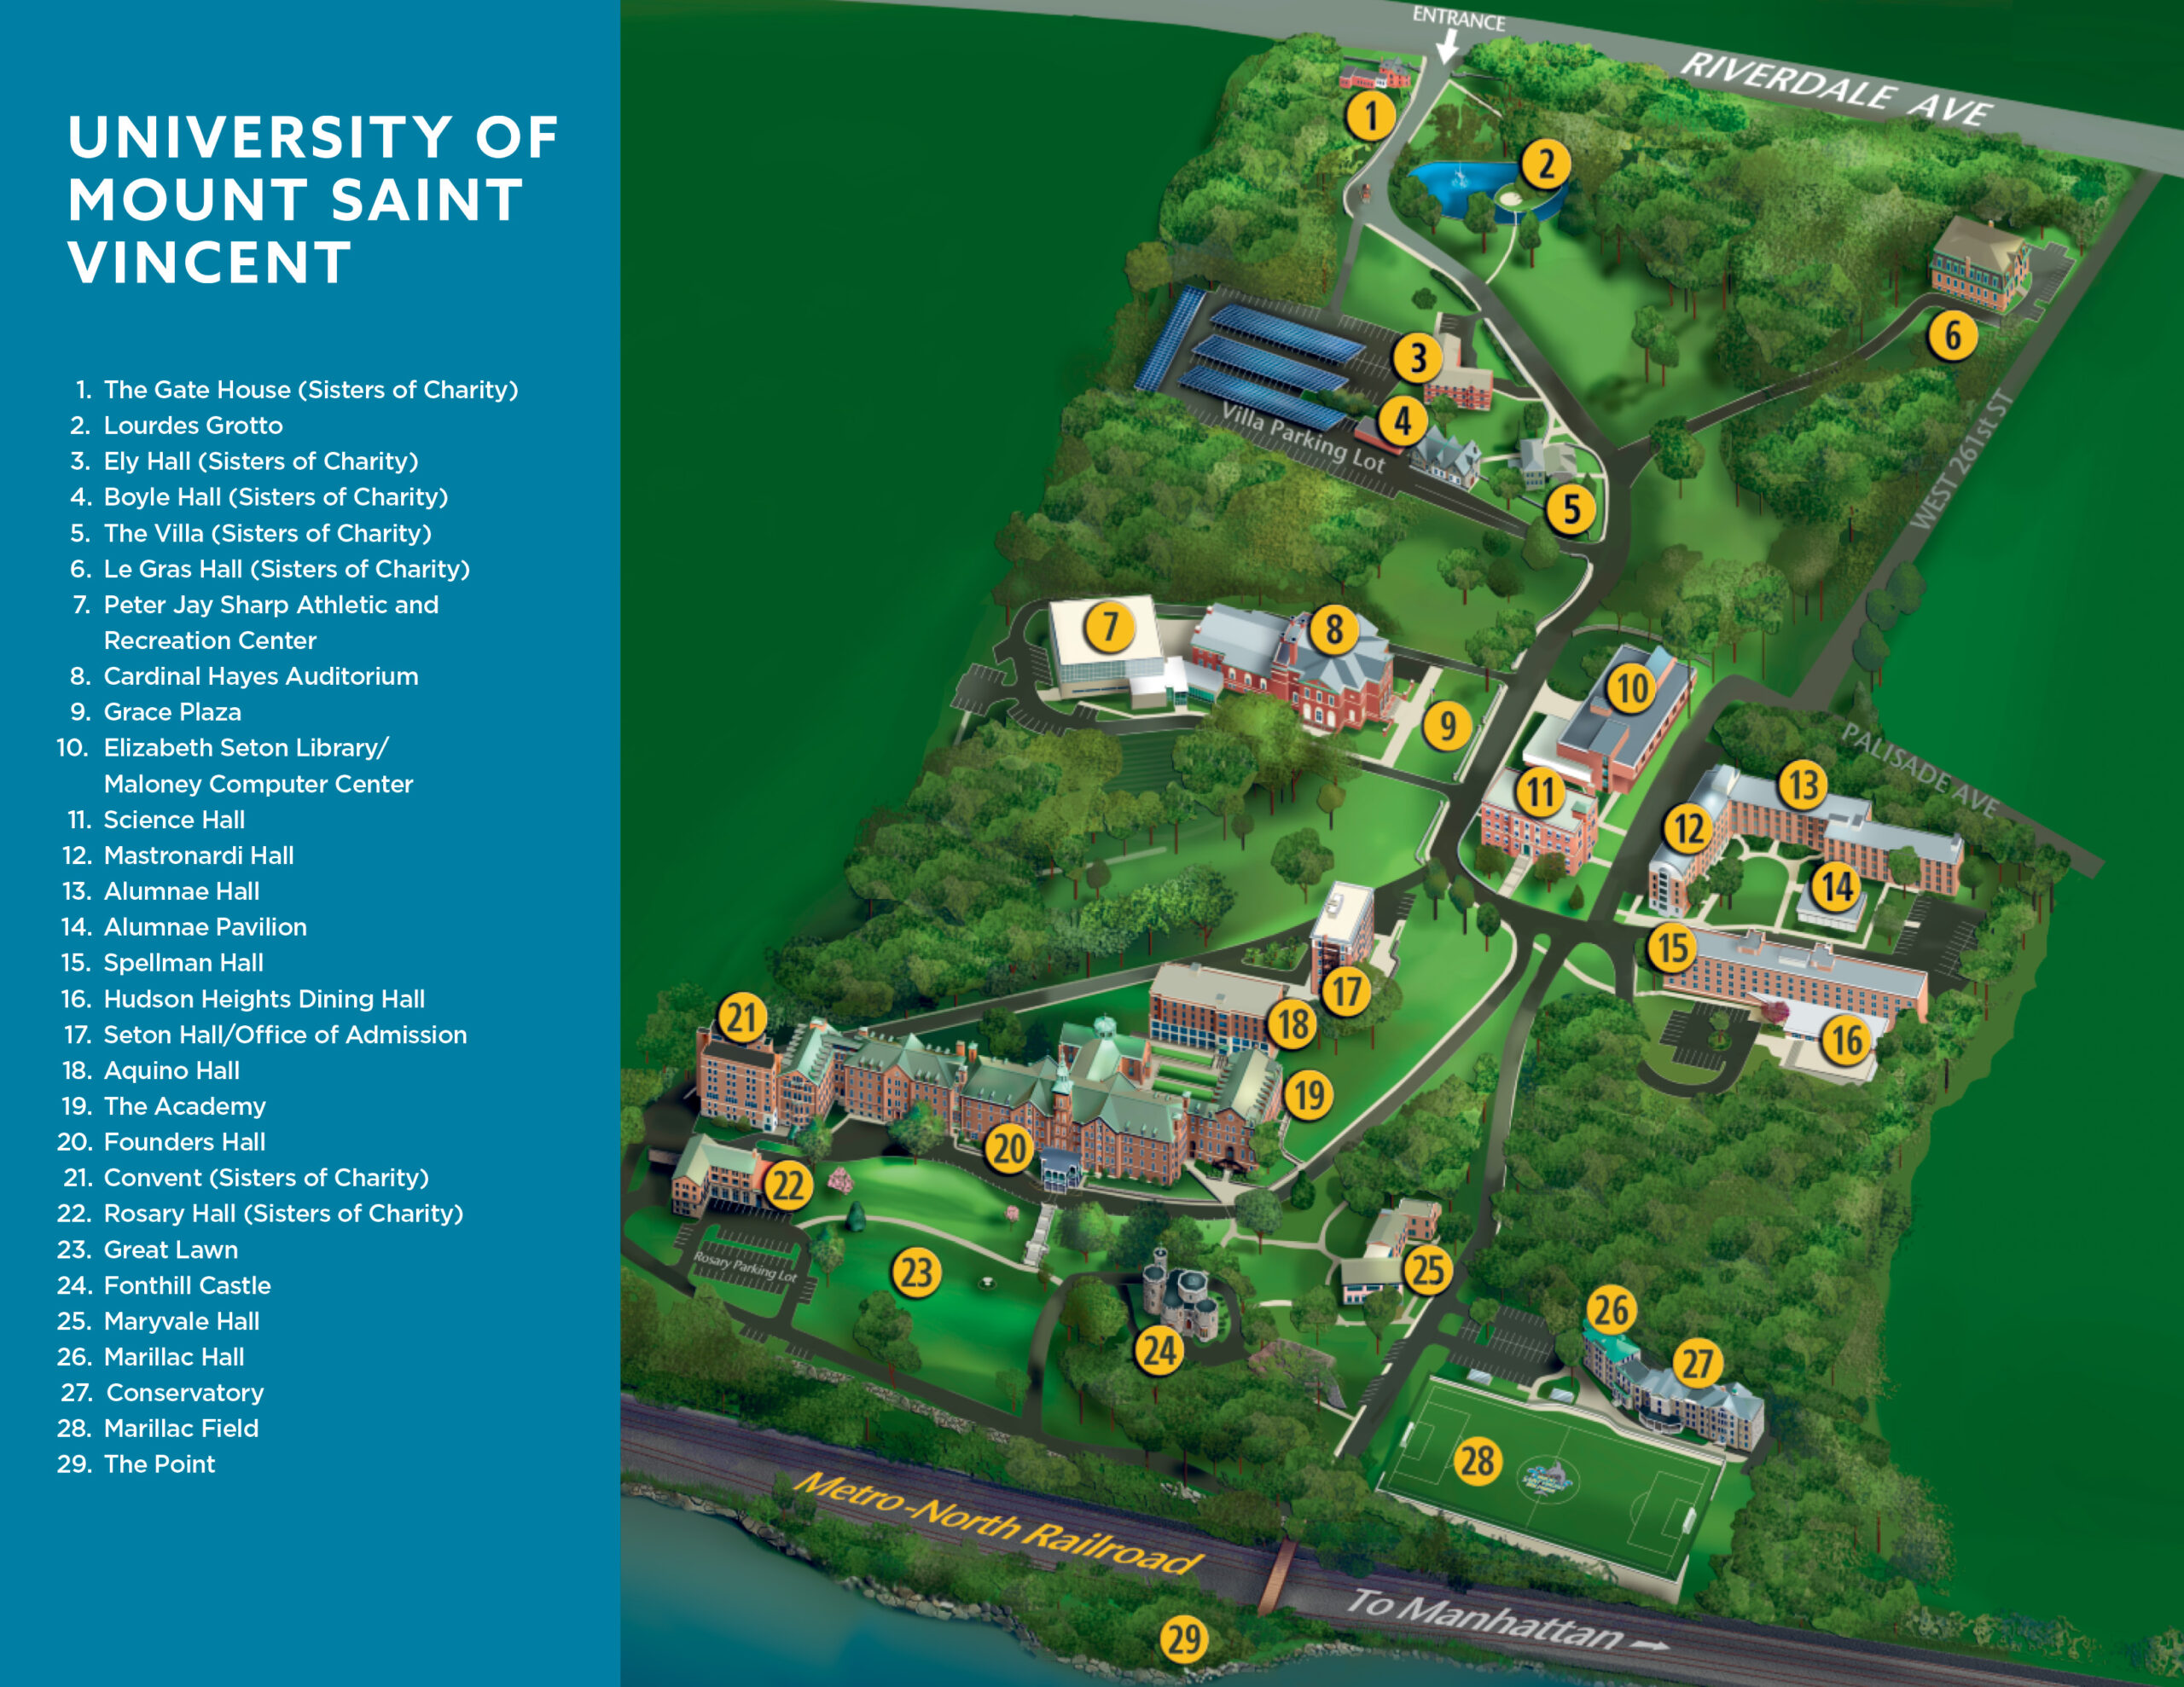 Illustrated map of the University of Mount Saint Vincent's Riverdale campus